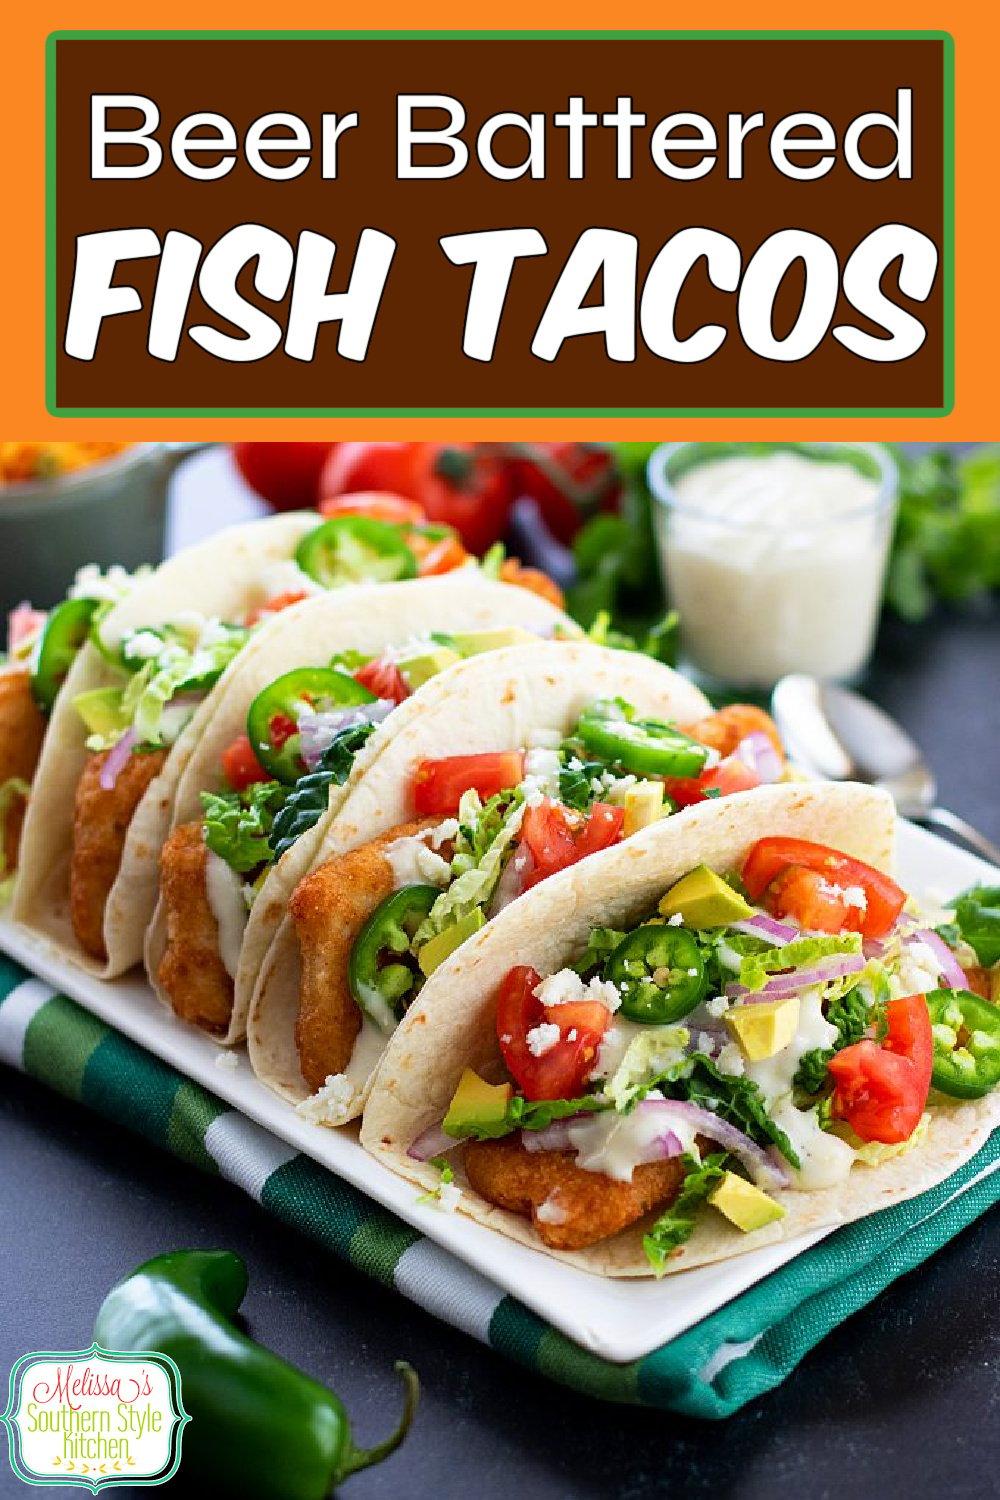 These full flavored crispy Beer Battered Fish Tacos are the perfect opportunity to set up a  toppings bar and create a seafood fiesta at home #fishtacos #beerbatteredfish #fish #friedfishrecipes #cod #mexicanfood #tacos #tacotuesday #beerbatter #fishfryrecipes #southerfriedfish via @melissasssk